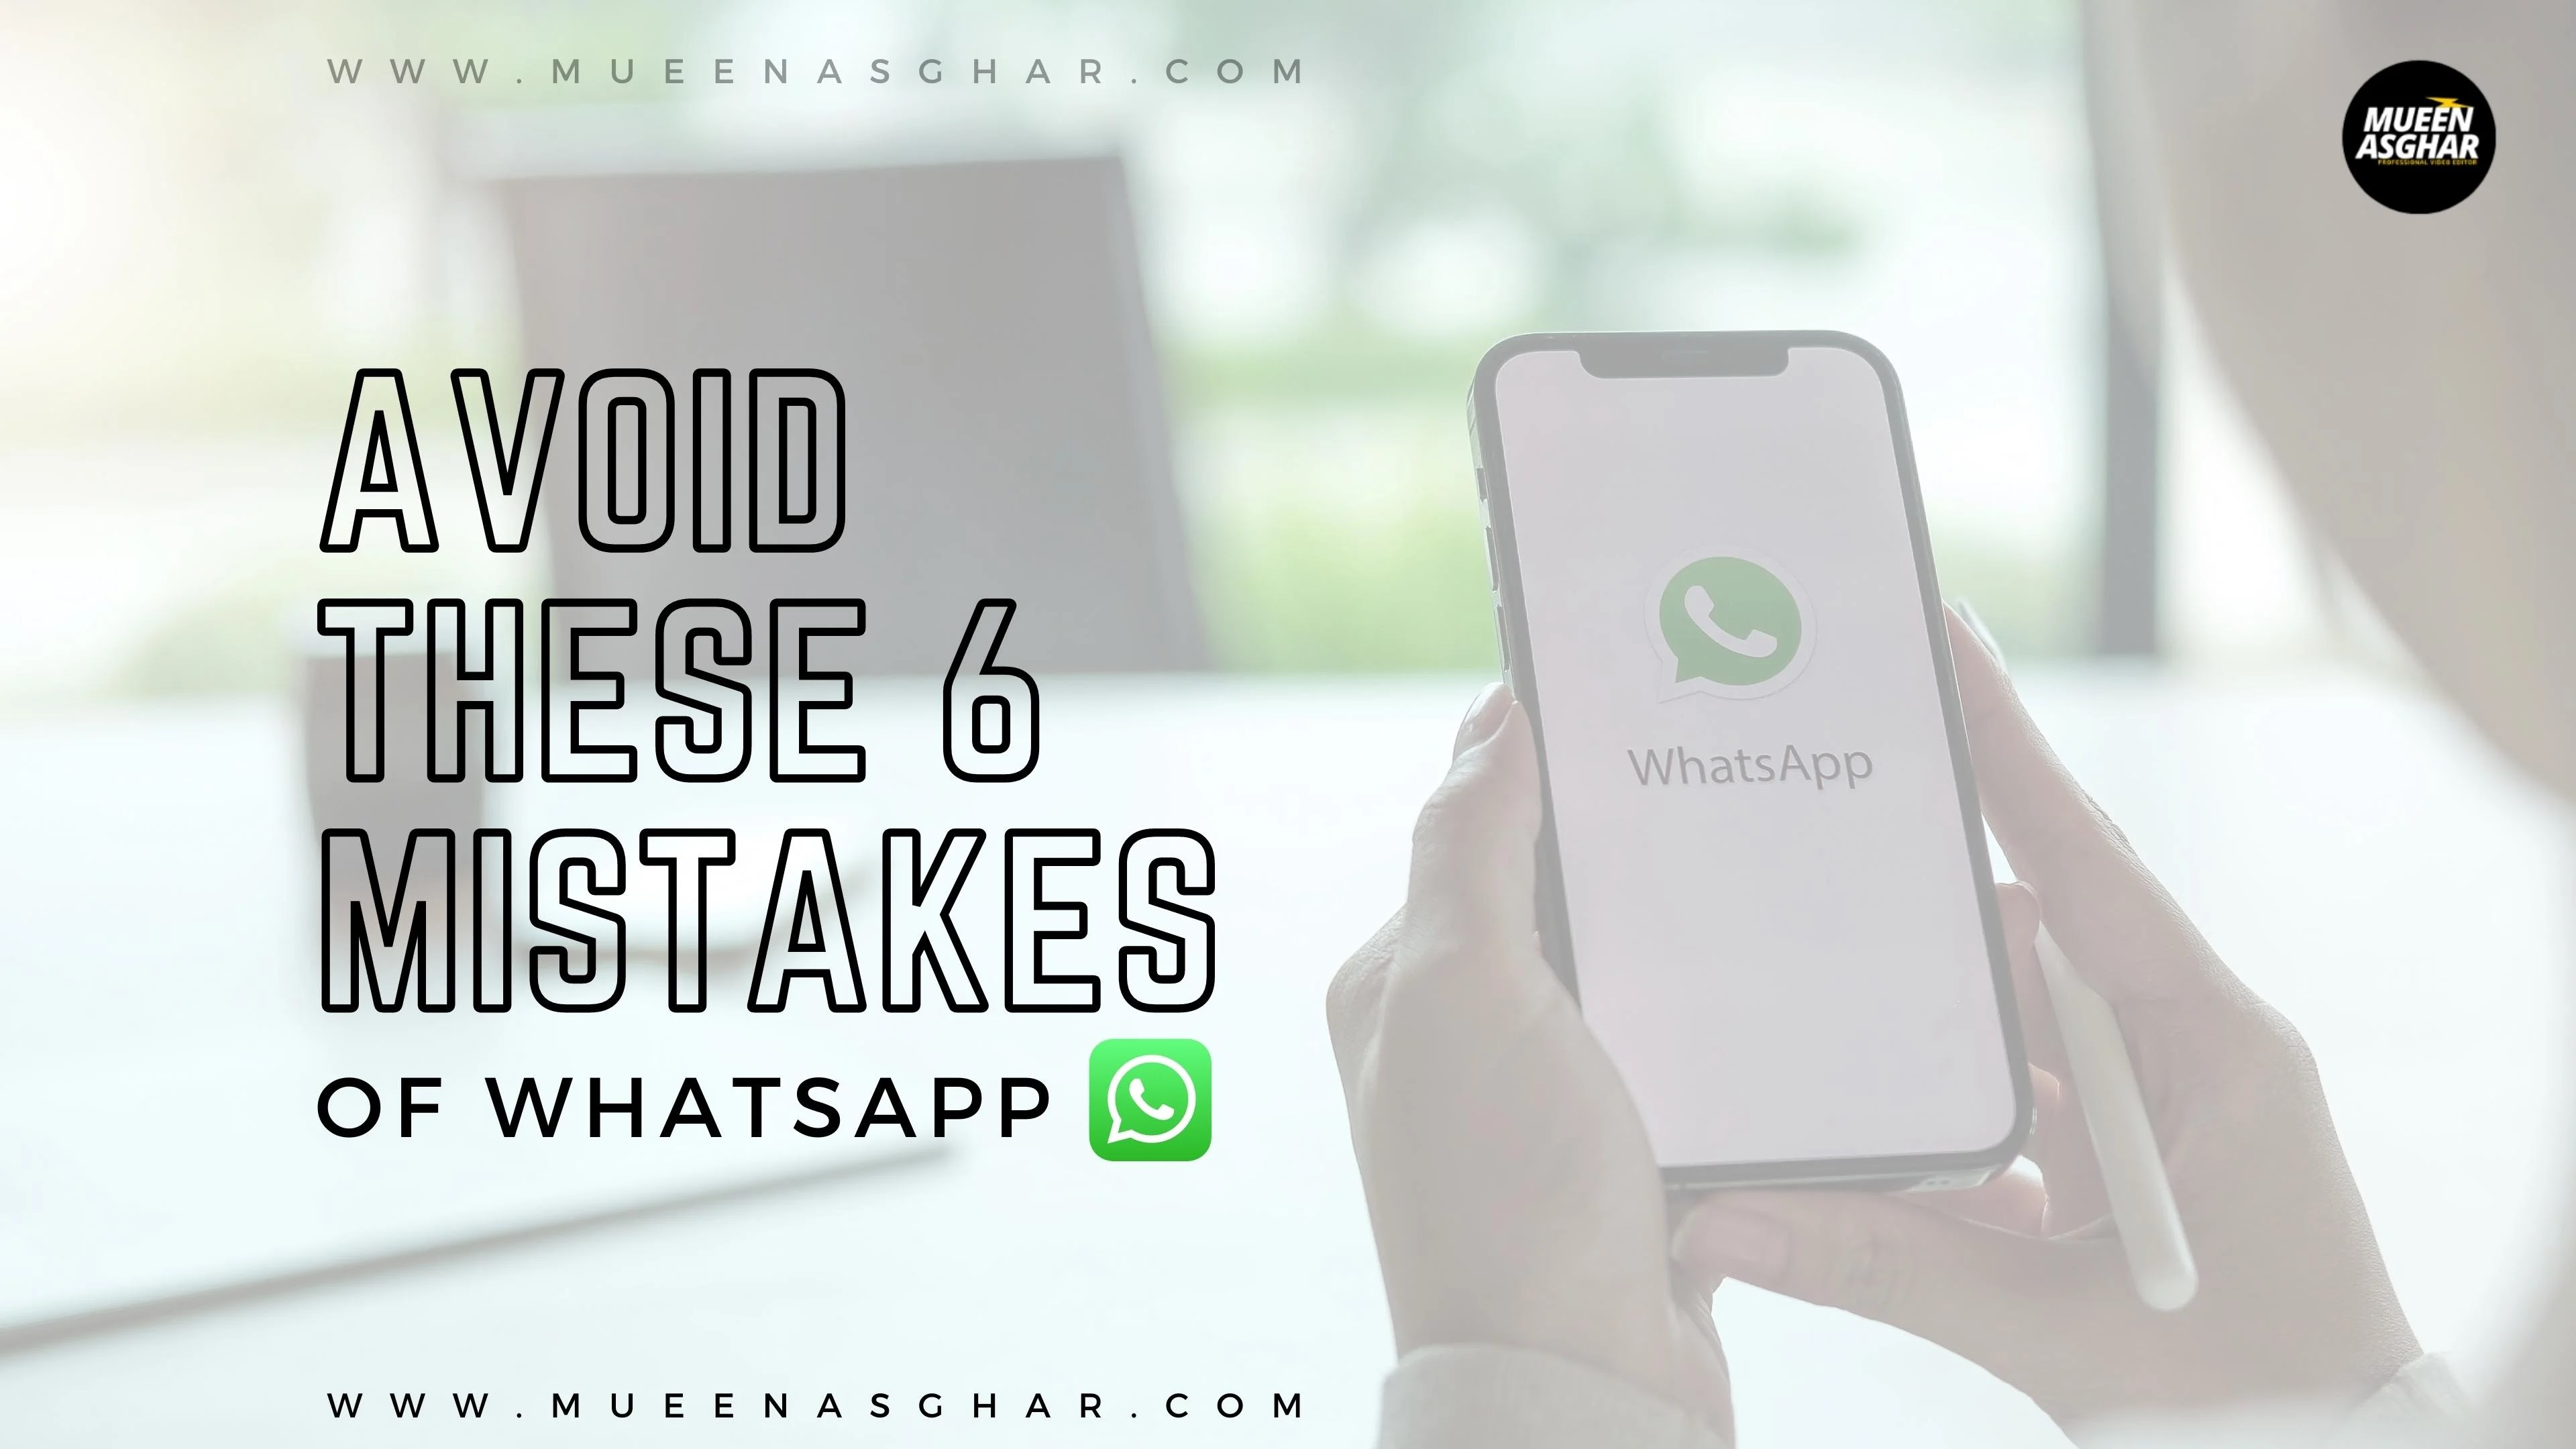 You must avoid these 6 mistakes of WhatsApp